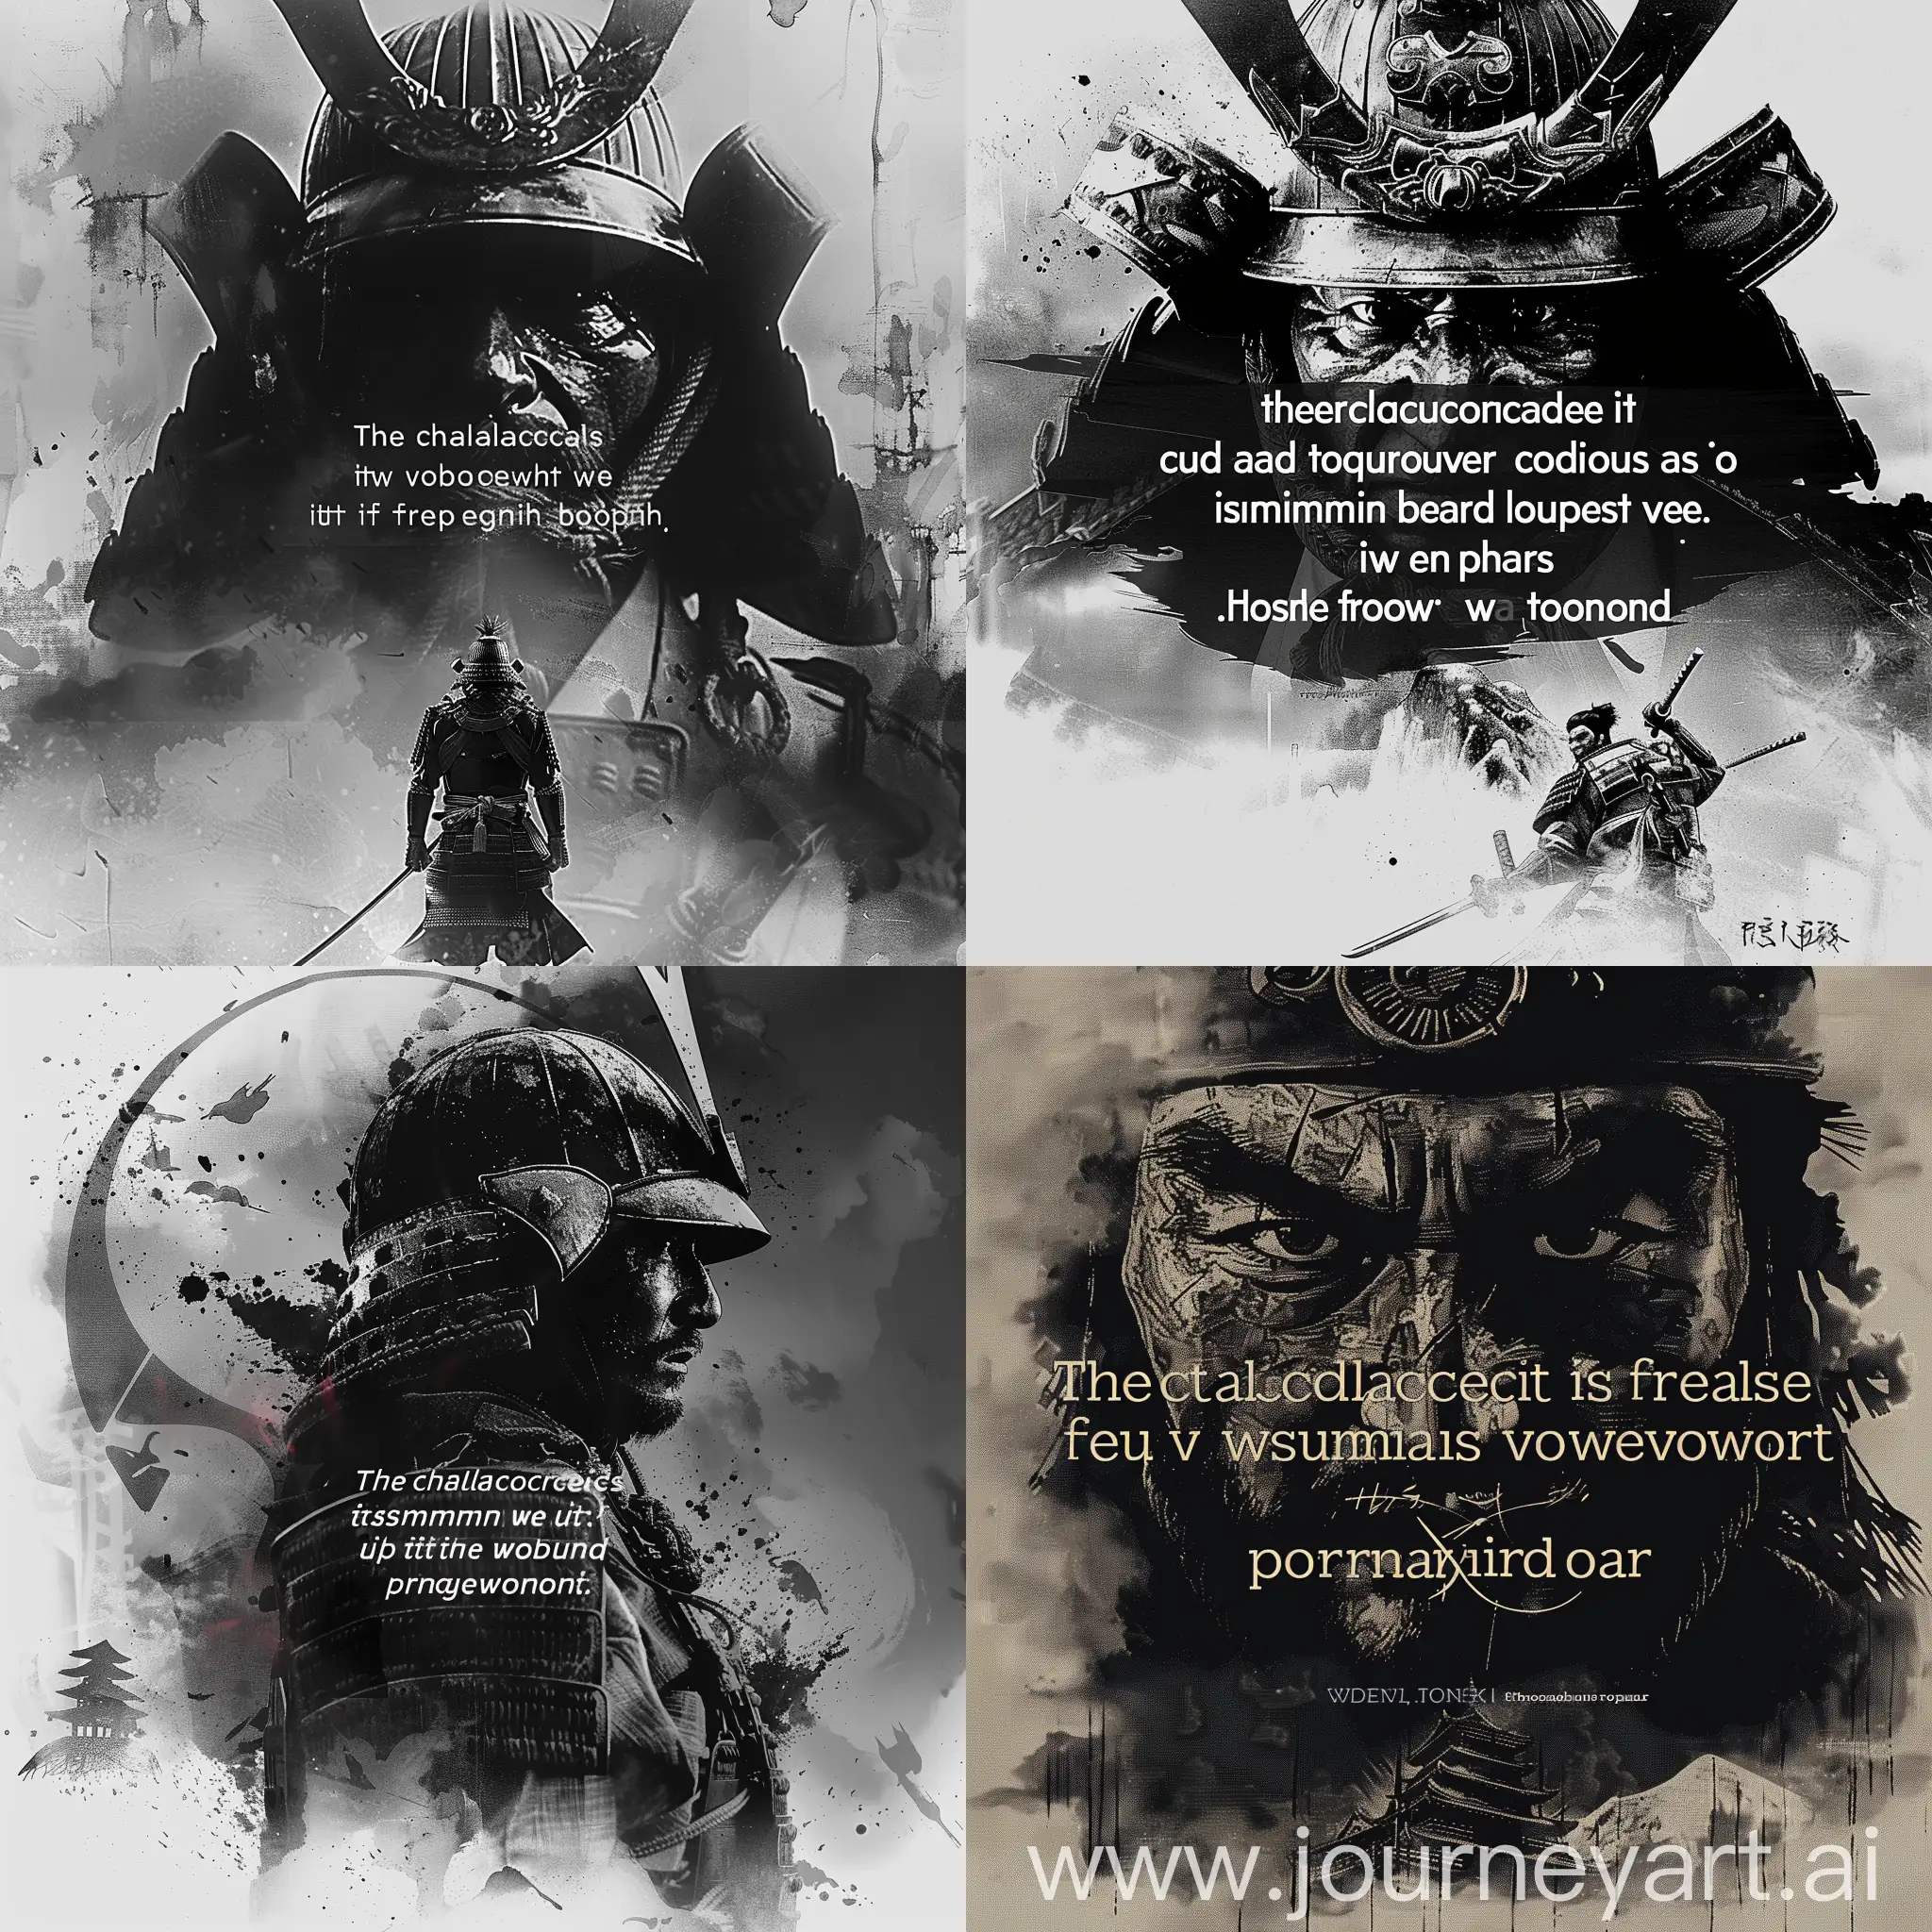 Insert this qute in the middle "The challenges we face can be overcome, if we summon our courage and cut ties with the past. Yesterday is behind us. We must look instead to the promise of tomorrow." and have a background of a wise samurai in black and white behind the quote.